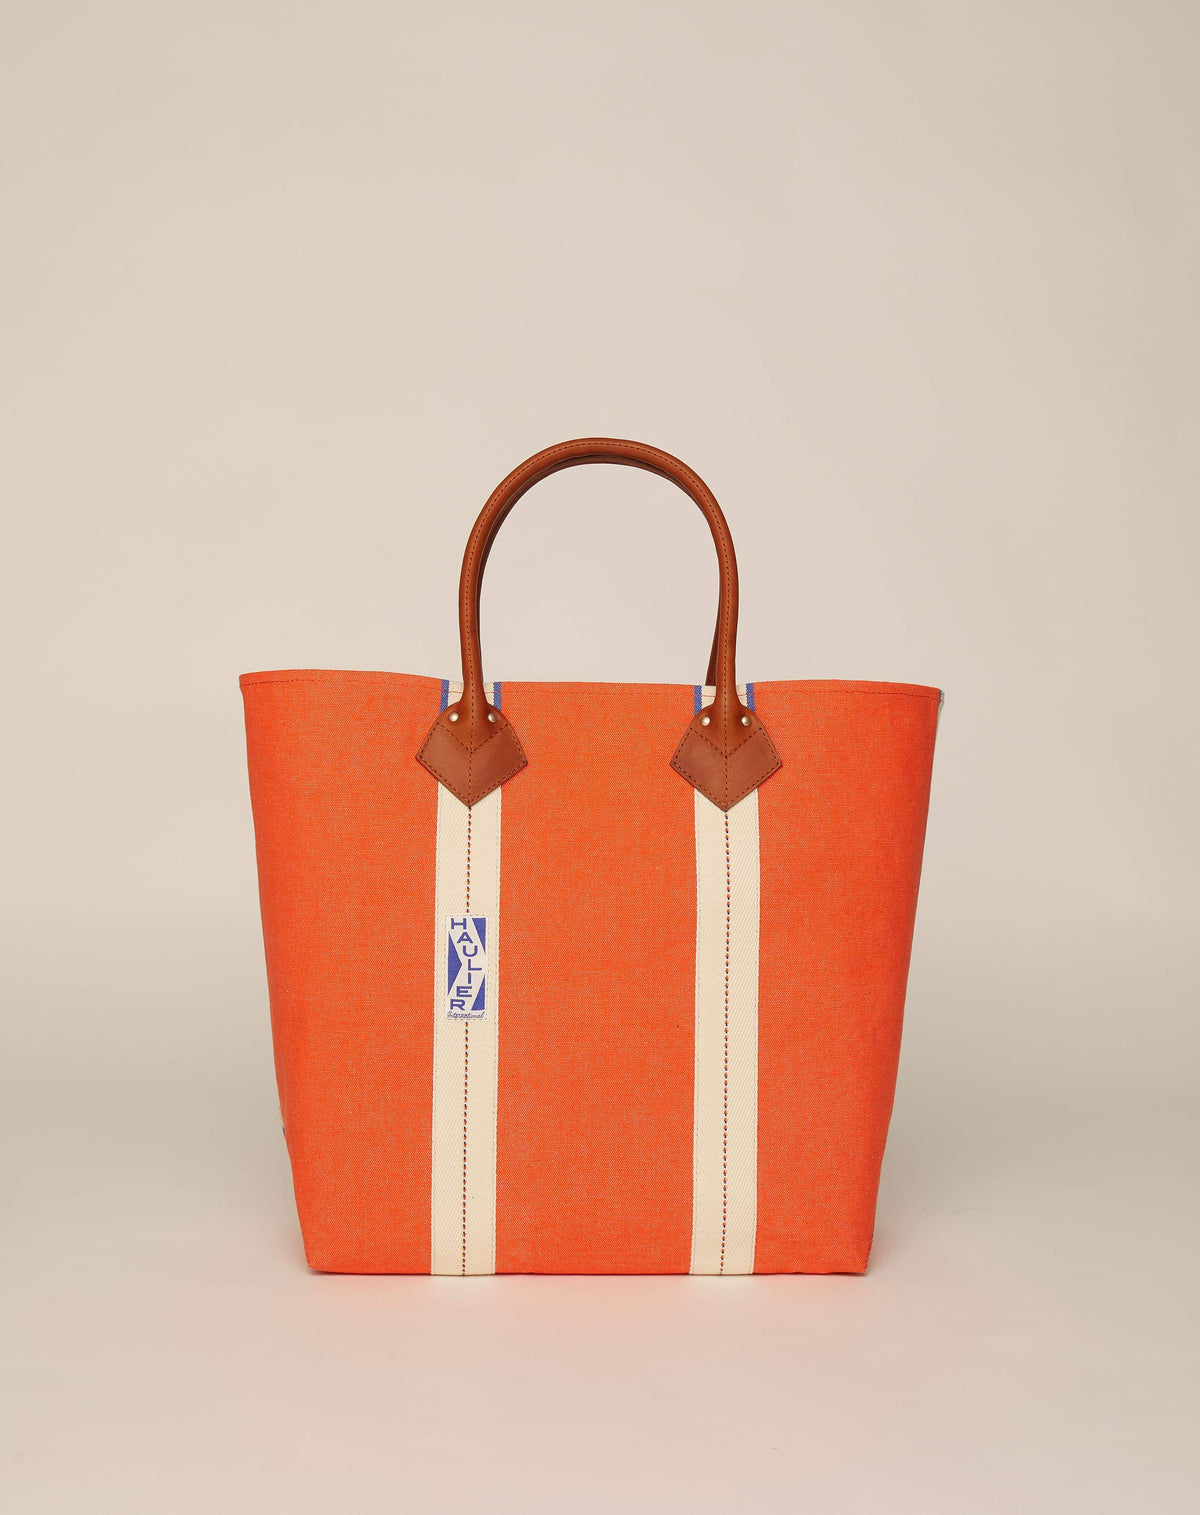 Image of medium-sized classic canvas tote bag in orange colour with tan leather handles and contrasting stripes.